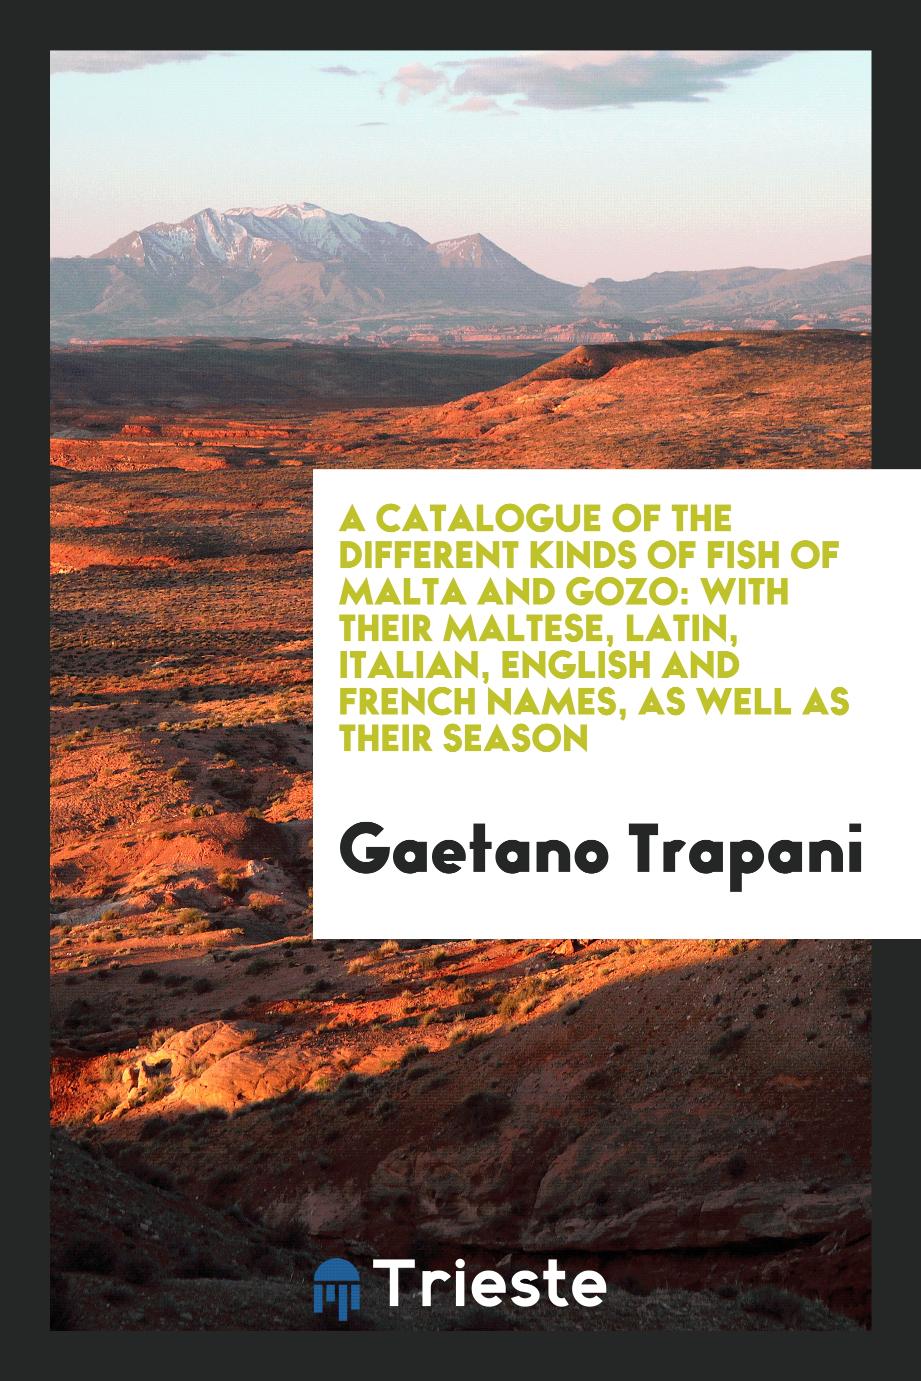 A catalogue of the different kinds of fish of Malta and Gozo: with their Maltese, Latin, Italian, English and French names, as well as their season